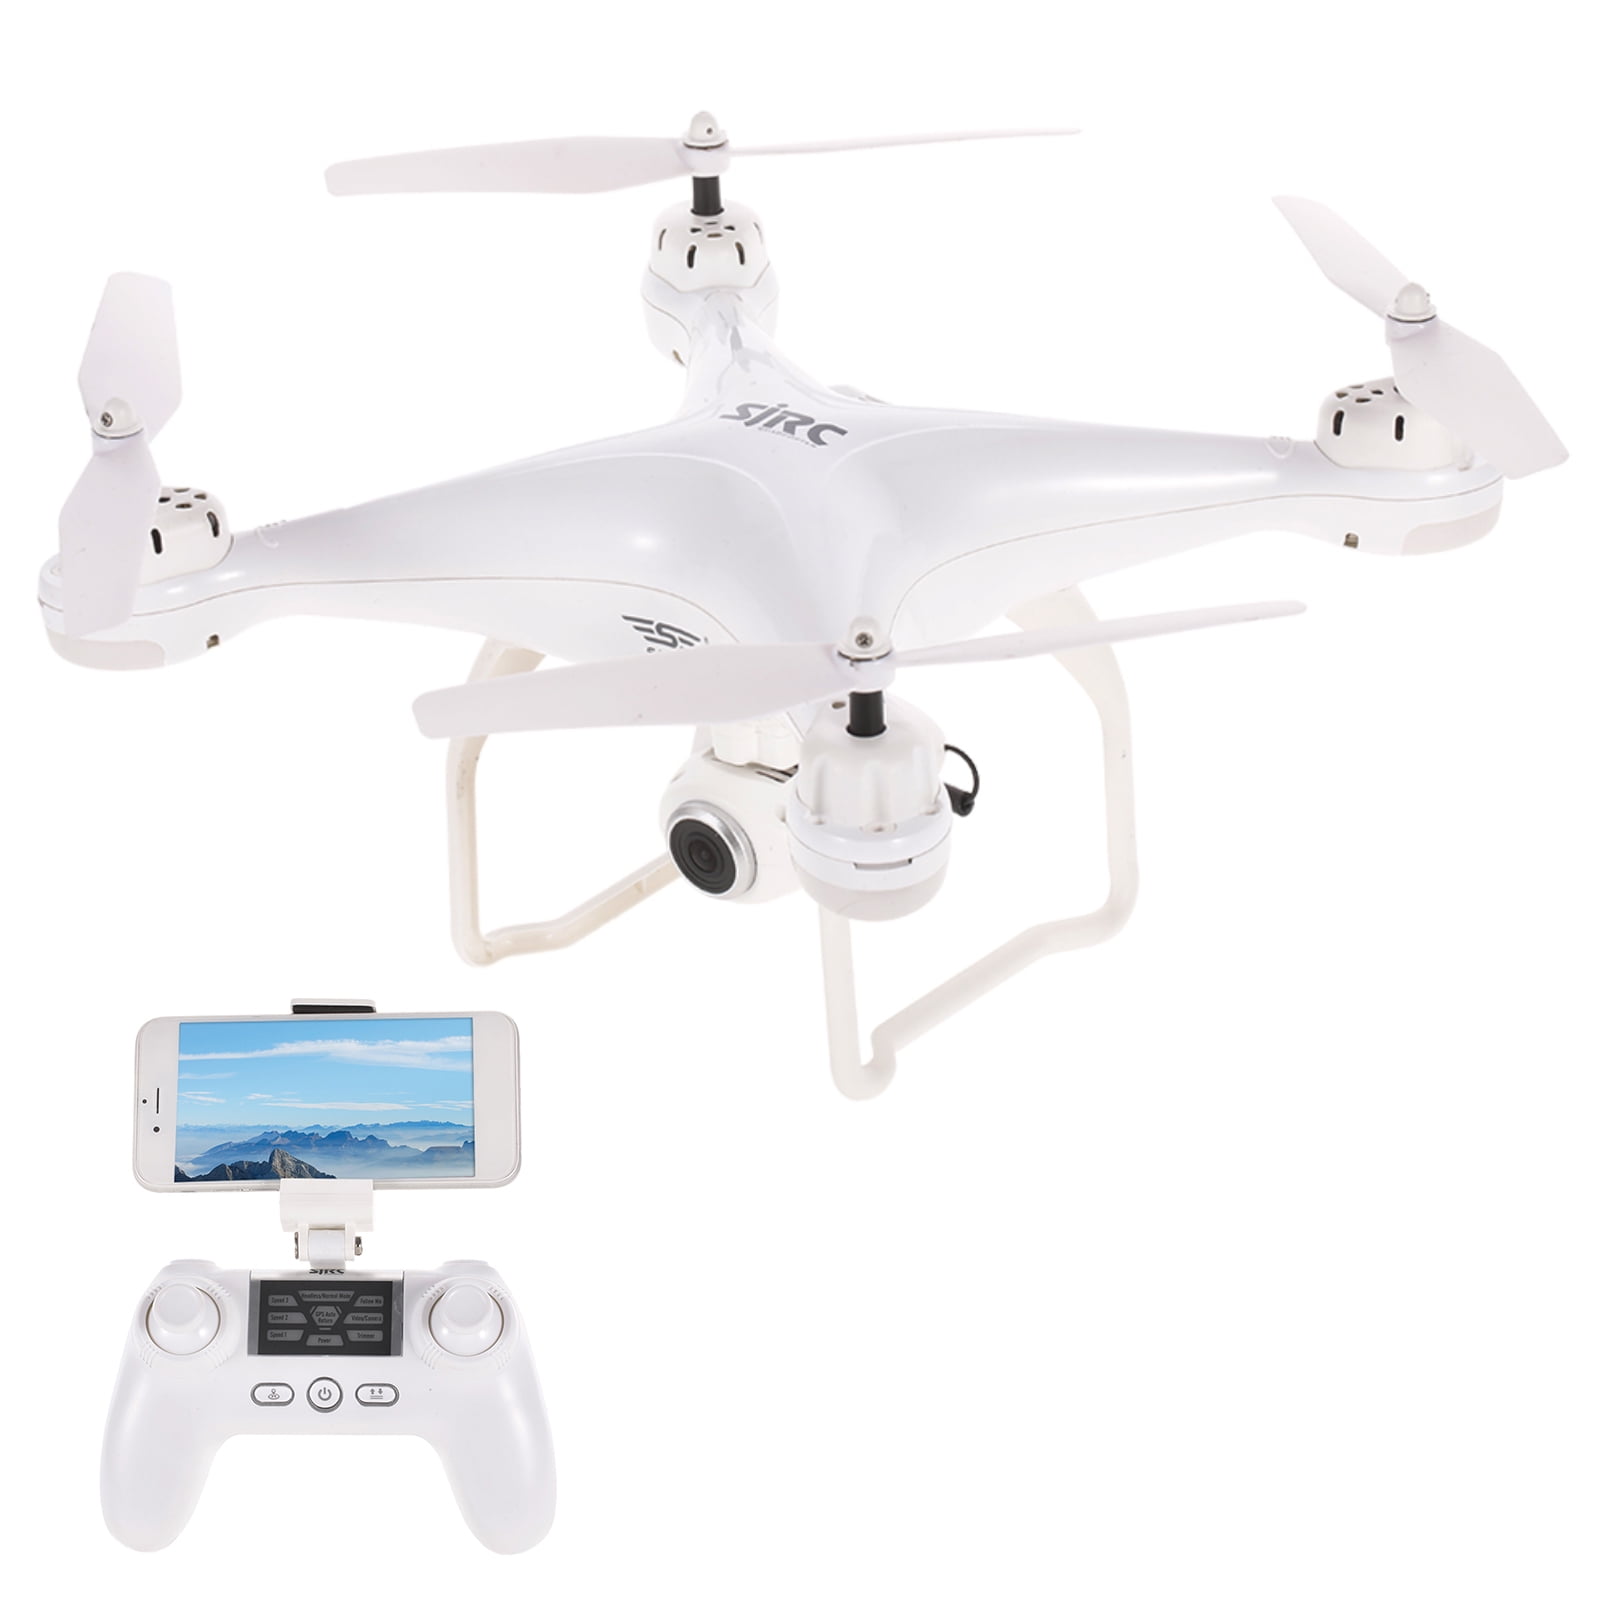 SJ S20W1080P() FPV Adjustable 1080P HD Wide Angle RTF Double Positioning Altitude Hold Quadcopter Drone Walmart.com